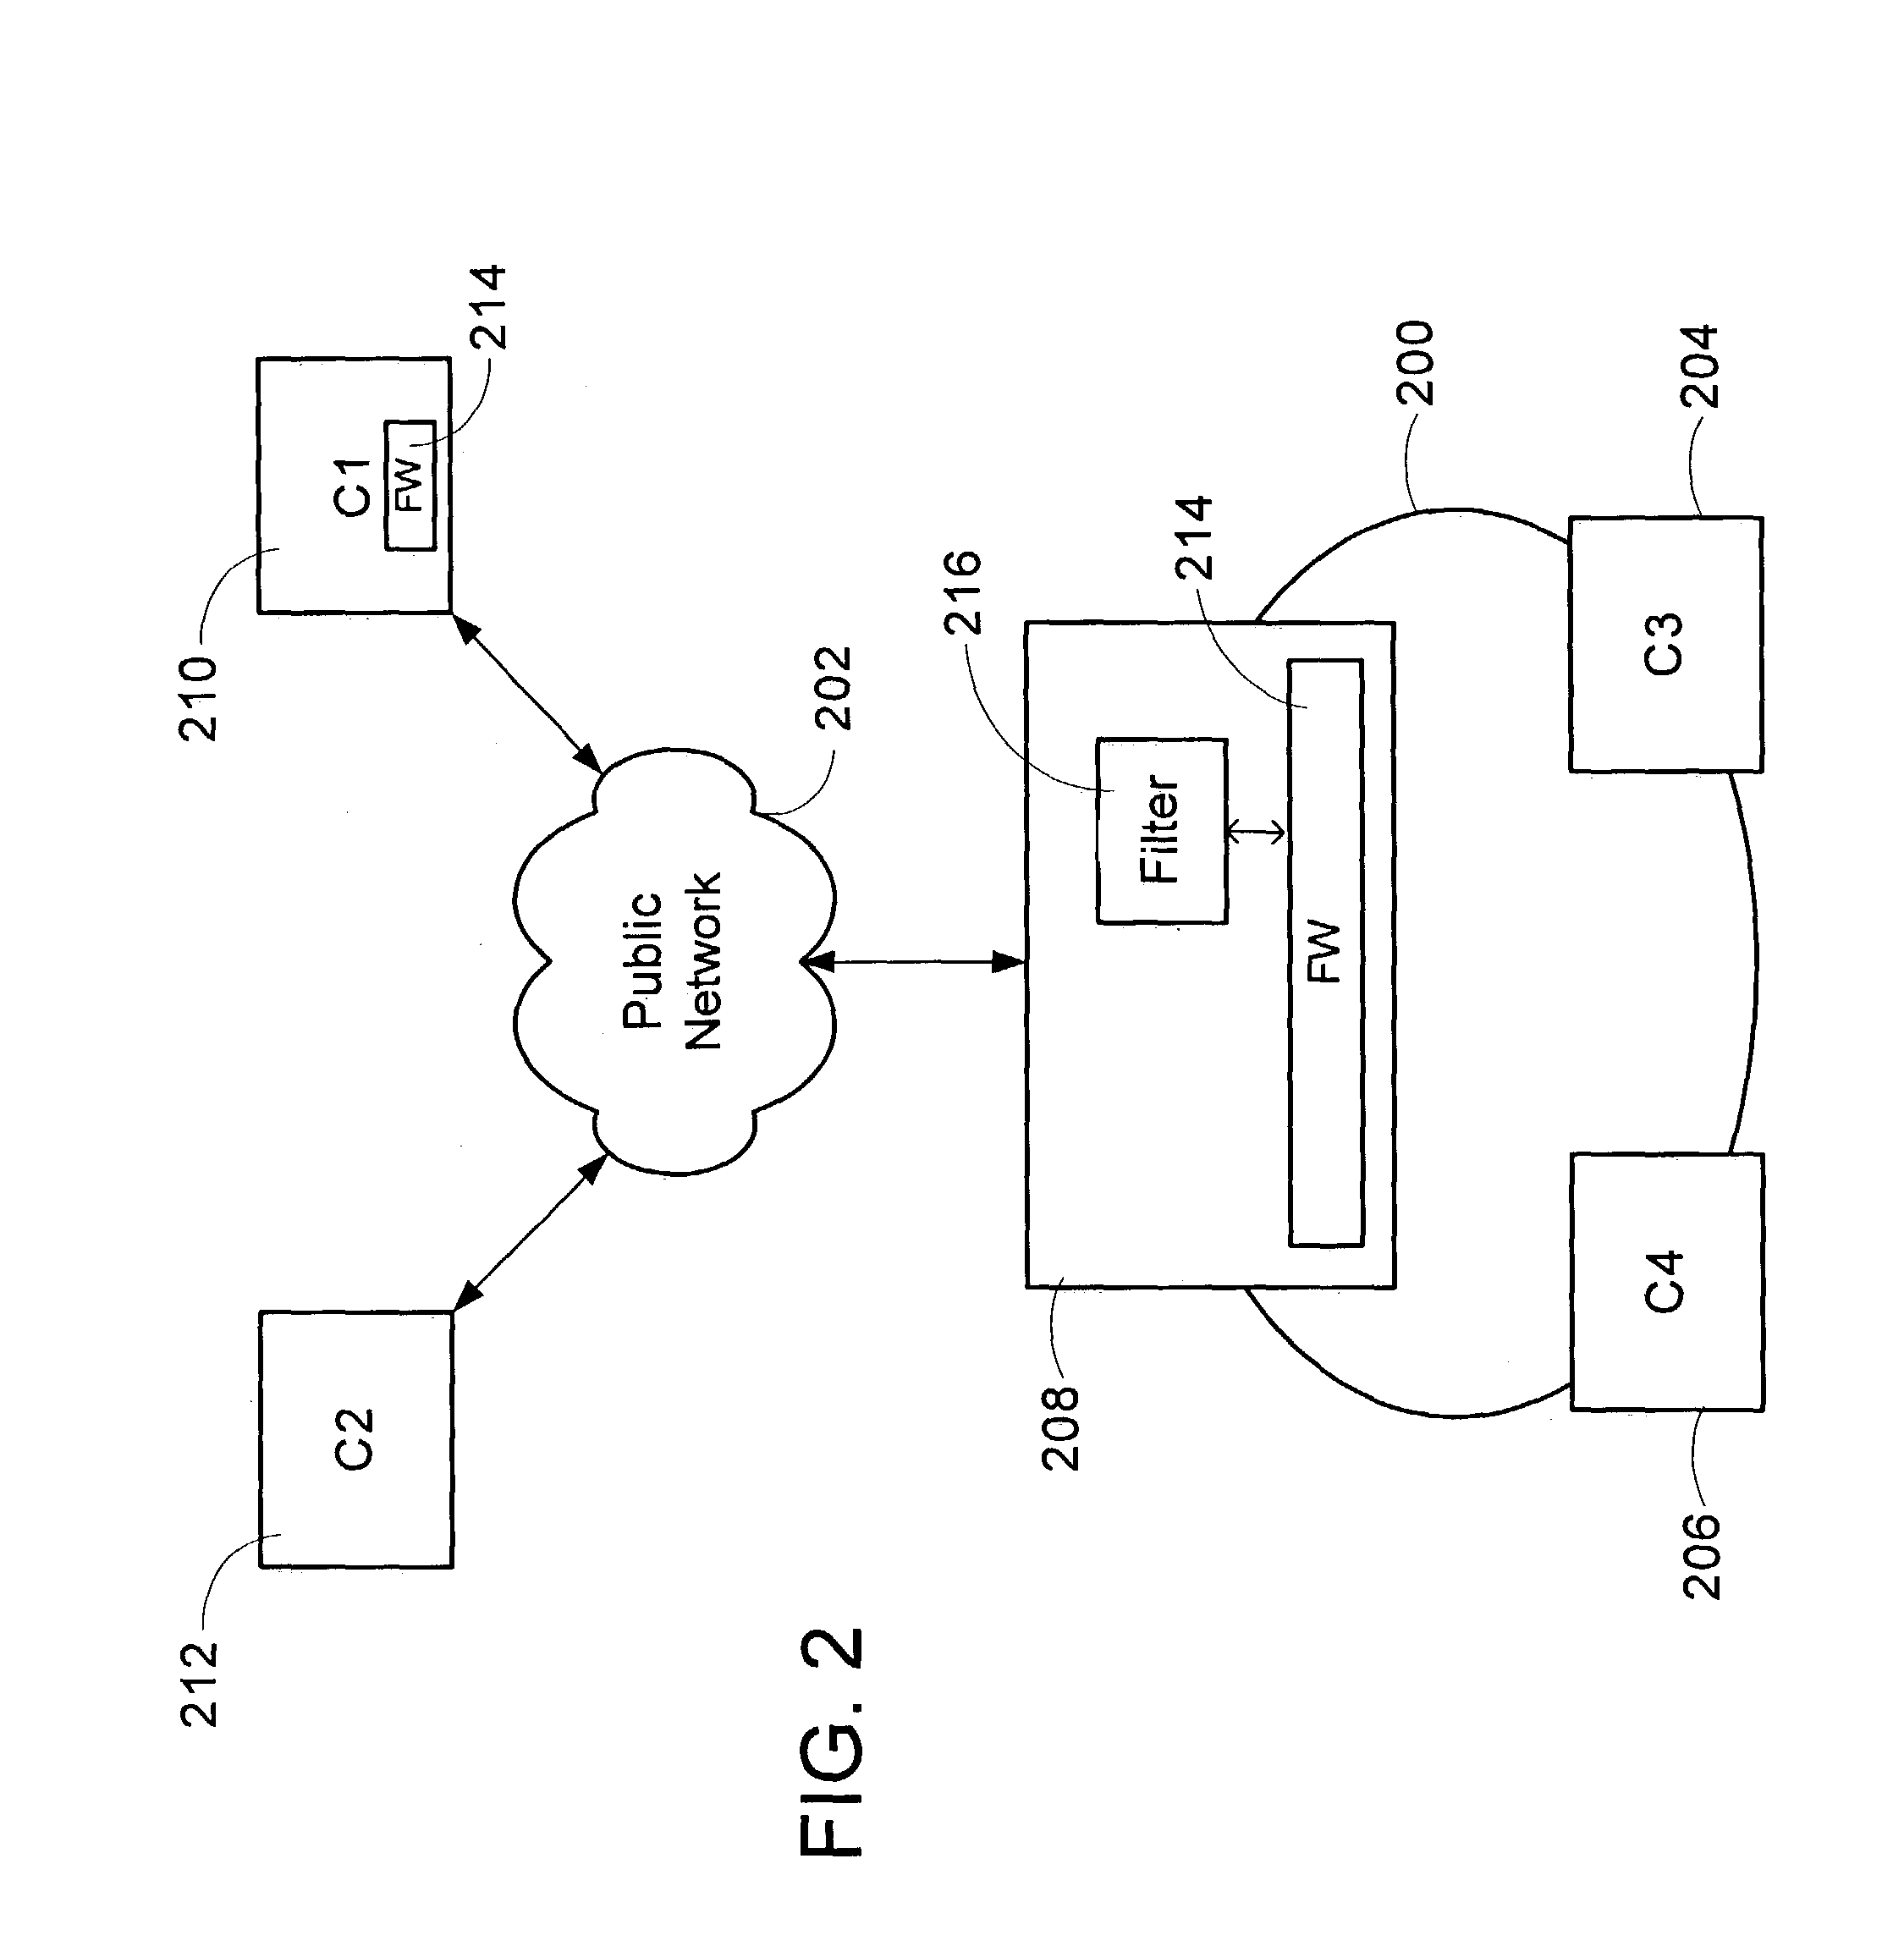 Multi-layer based method for implementing network firewalls